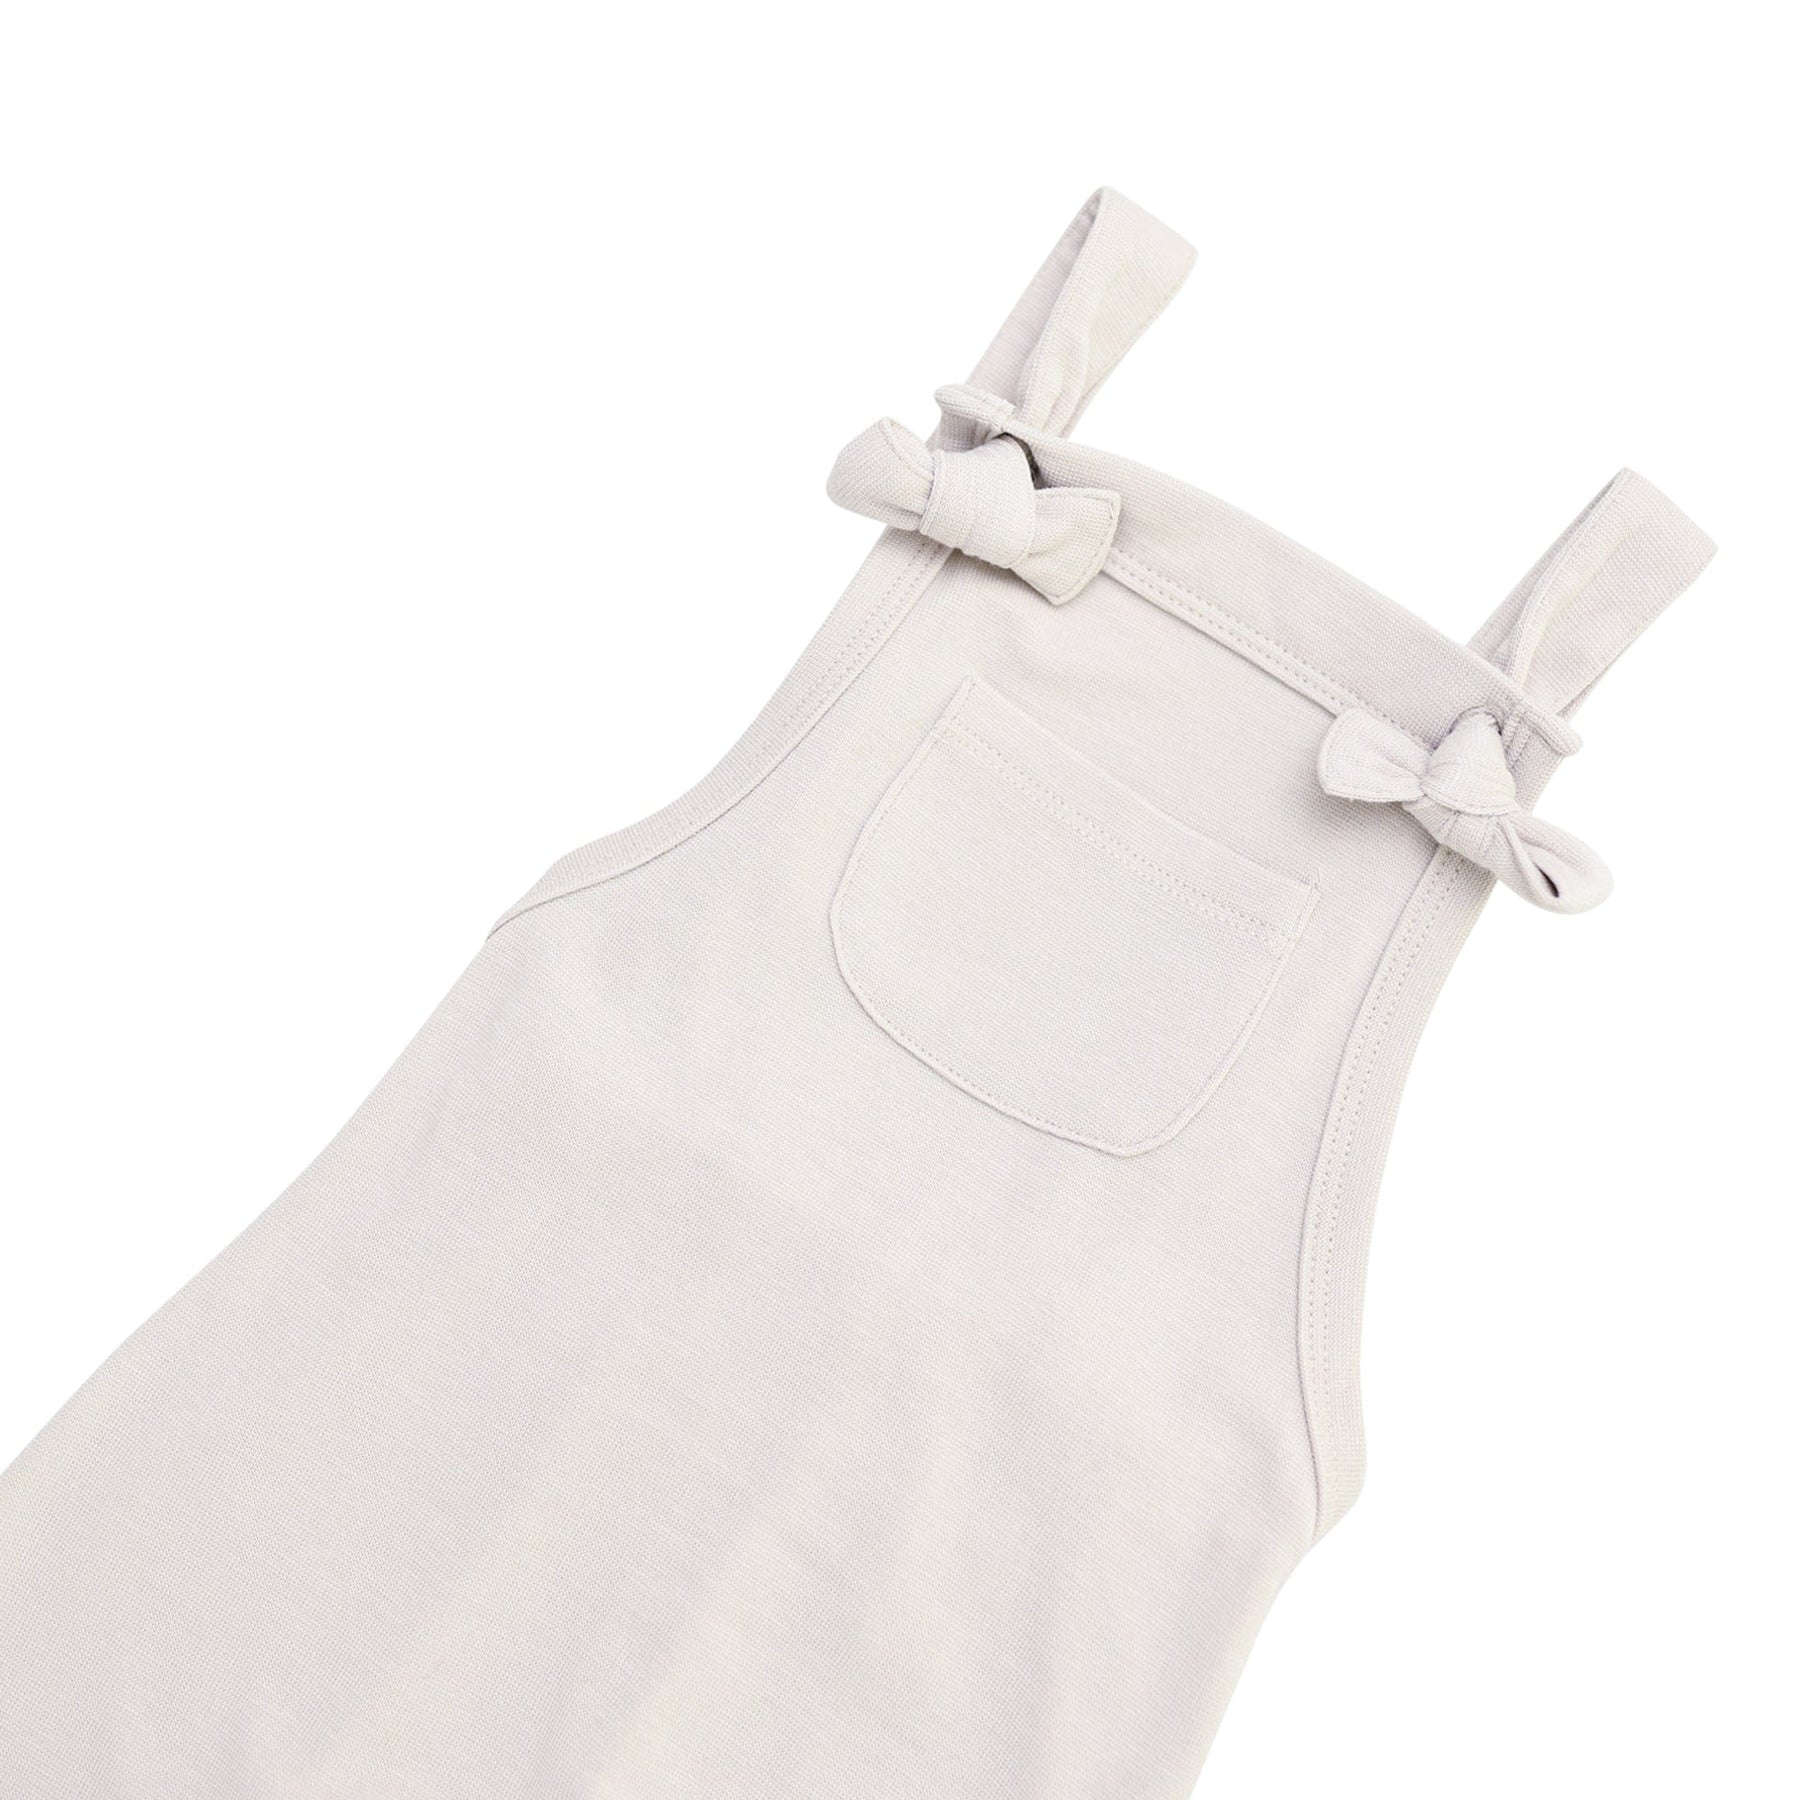 Kyte BABY Baby Overall Bamboo Jersey Overall in Oat